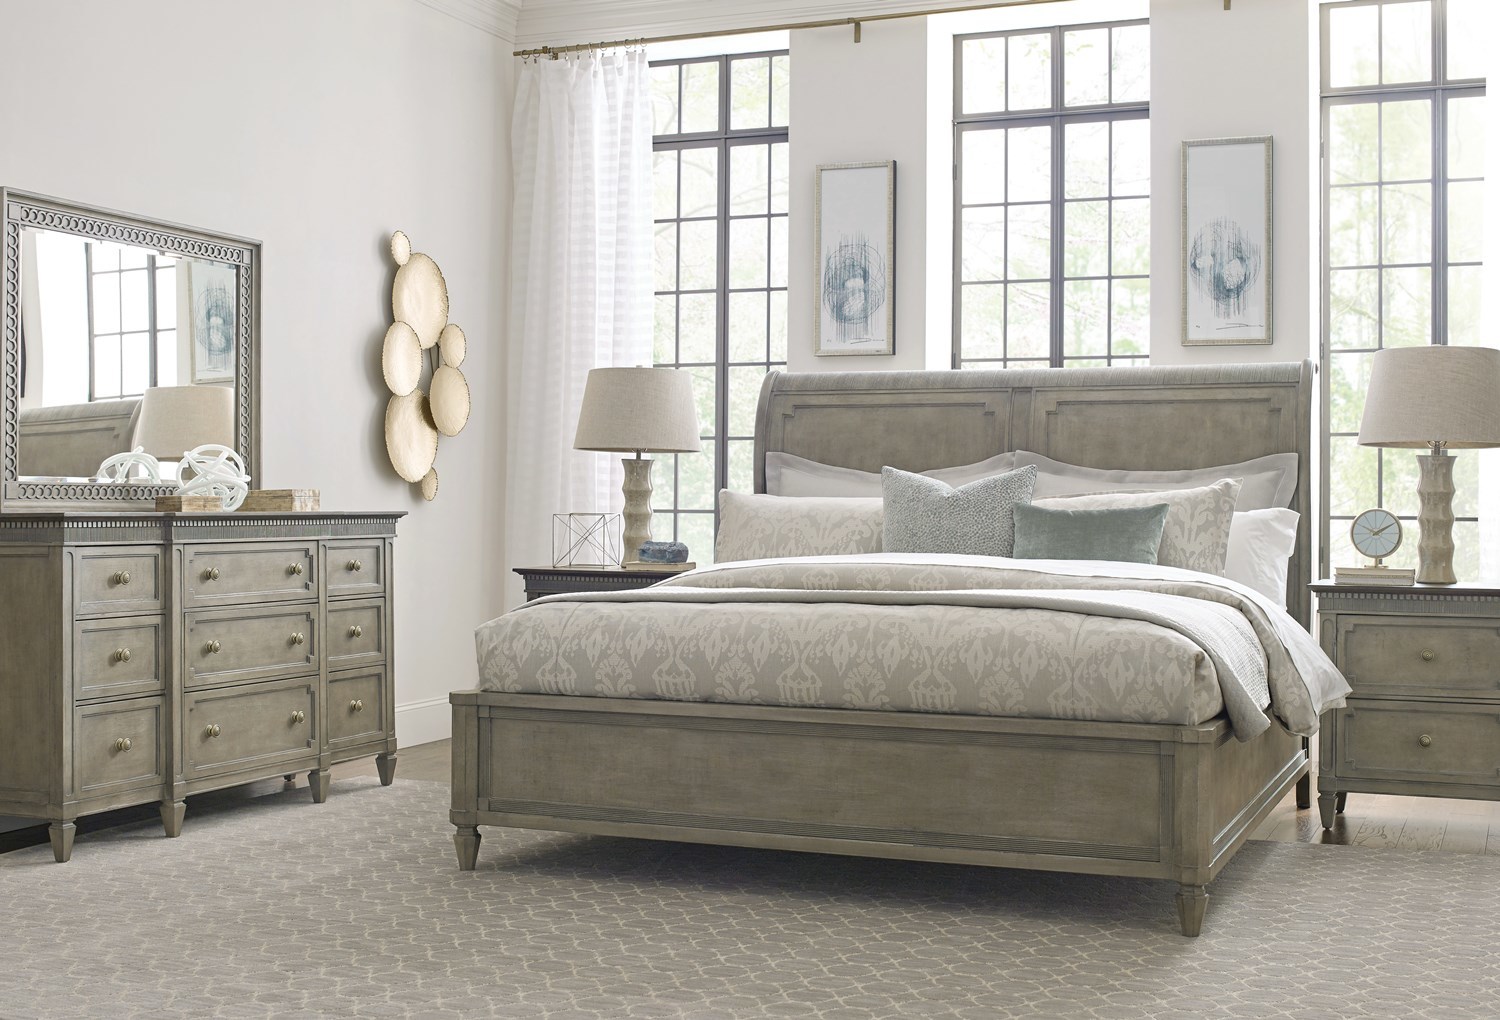 Introducing Savona - a French gray bedroom and dining room furniture collection from American Drew